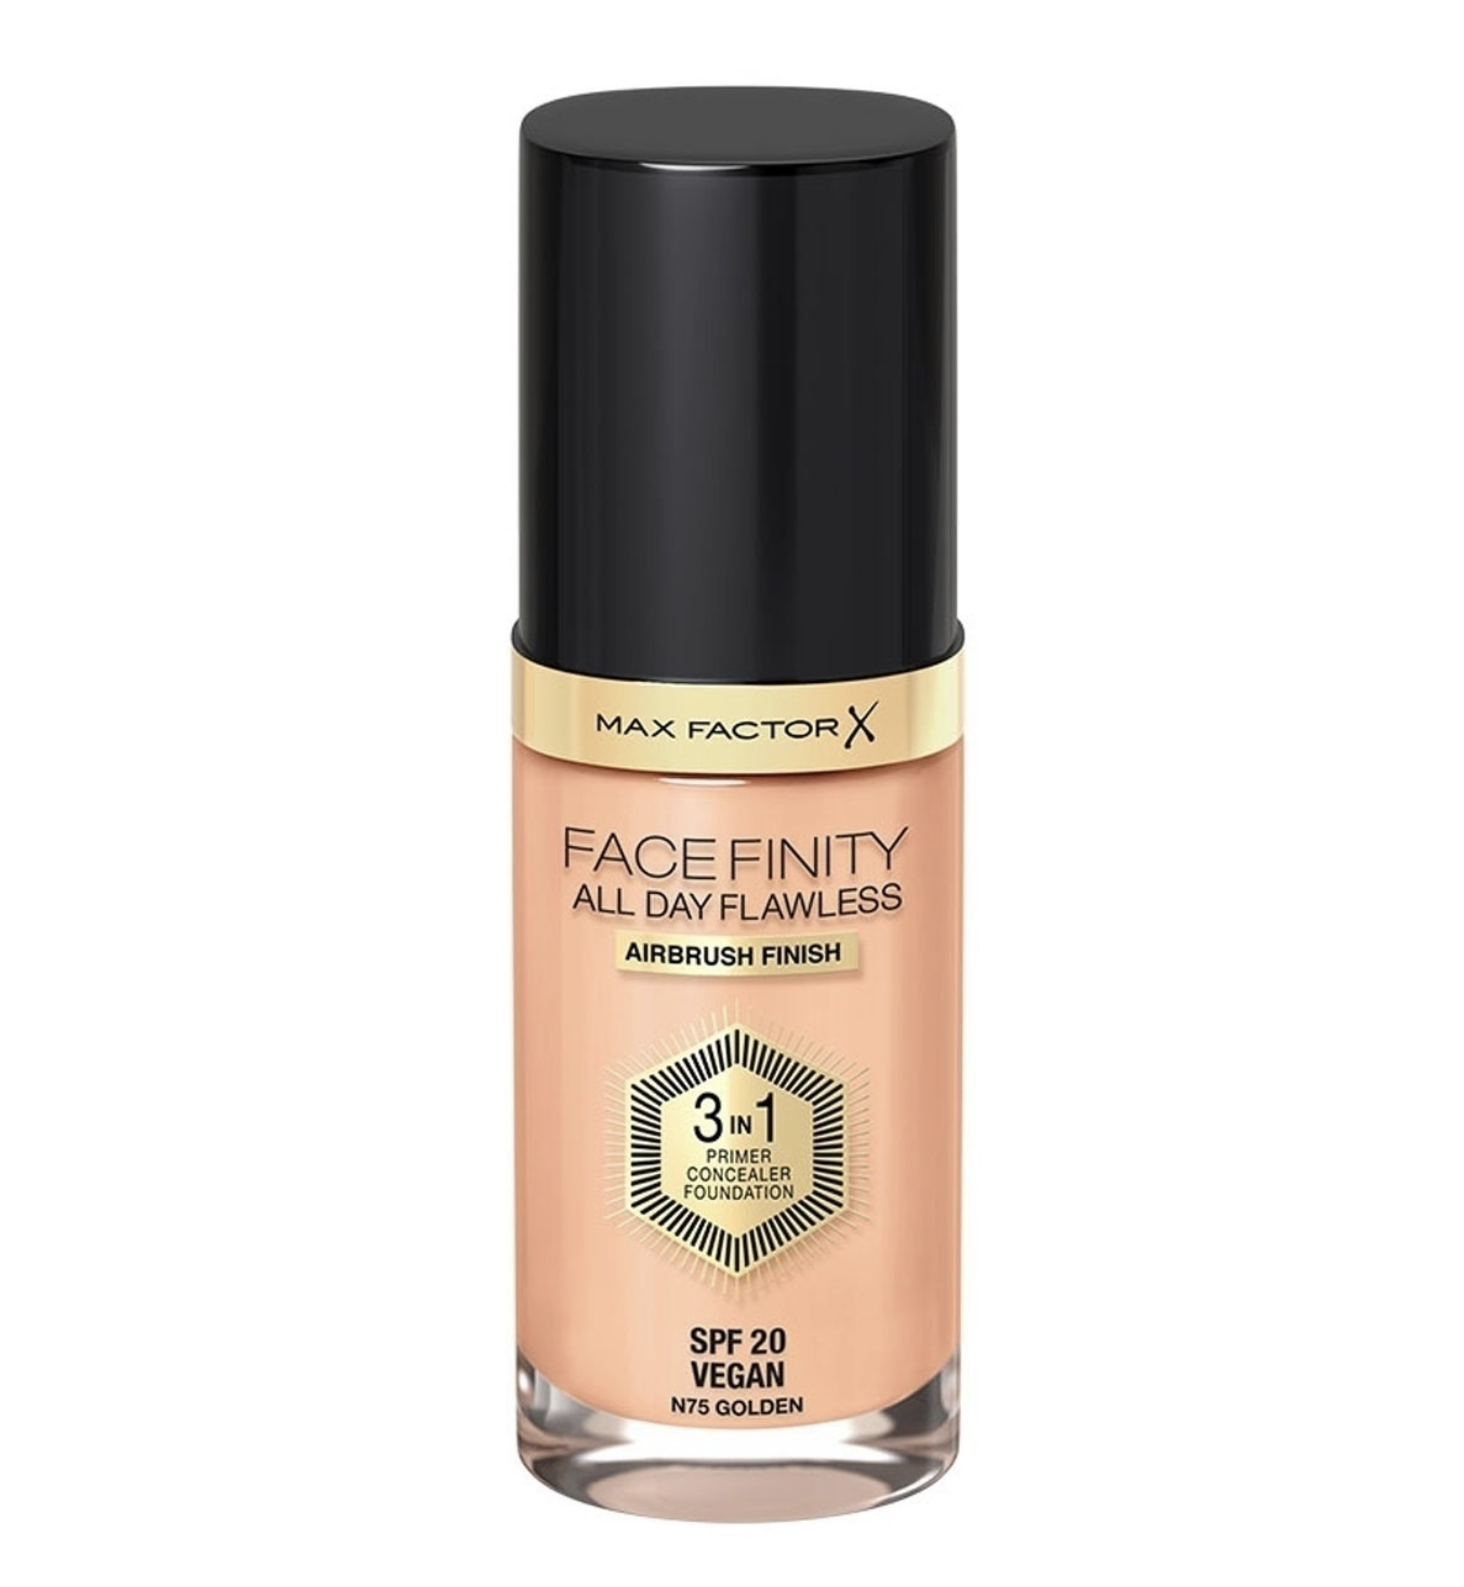    / Max Factor -   31 Facefinity All Day Flawless  75 Golden 30 